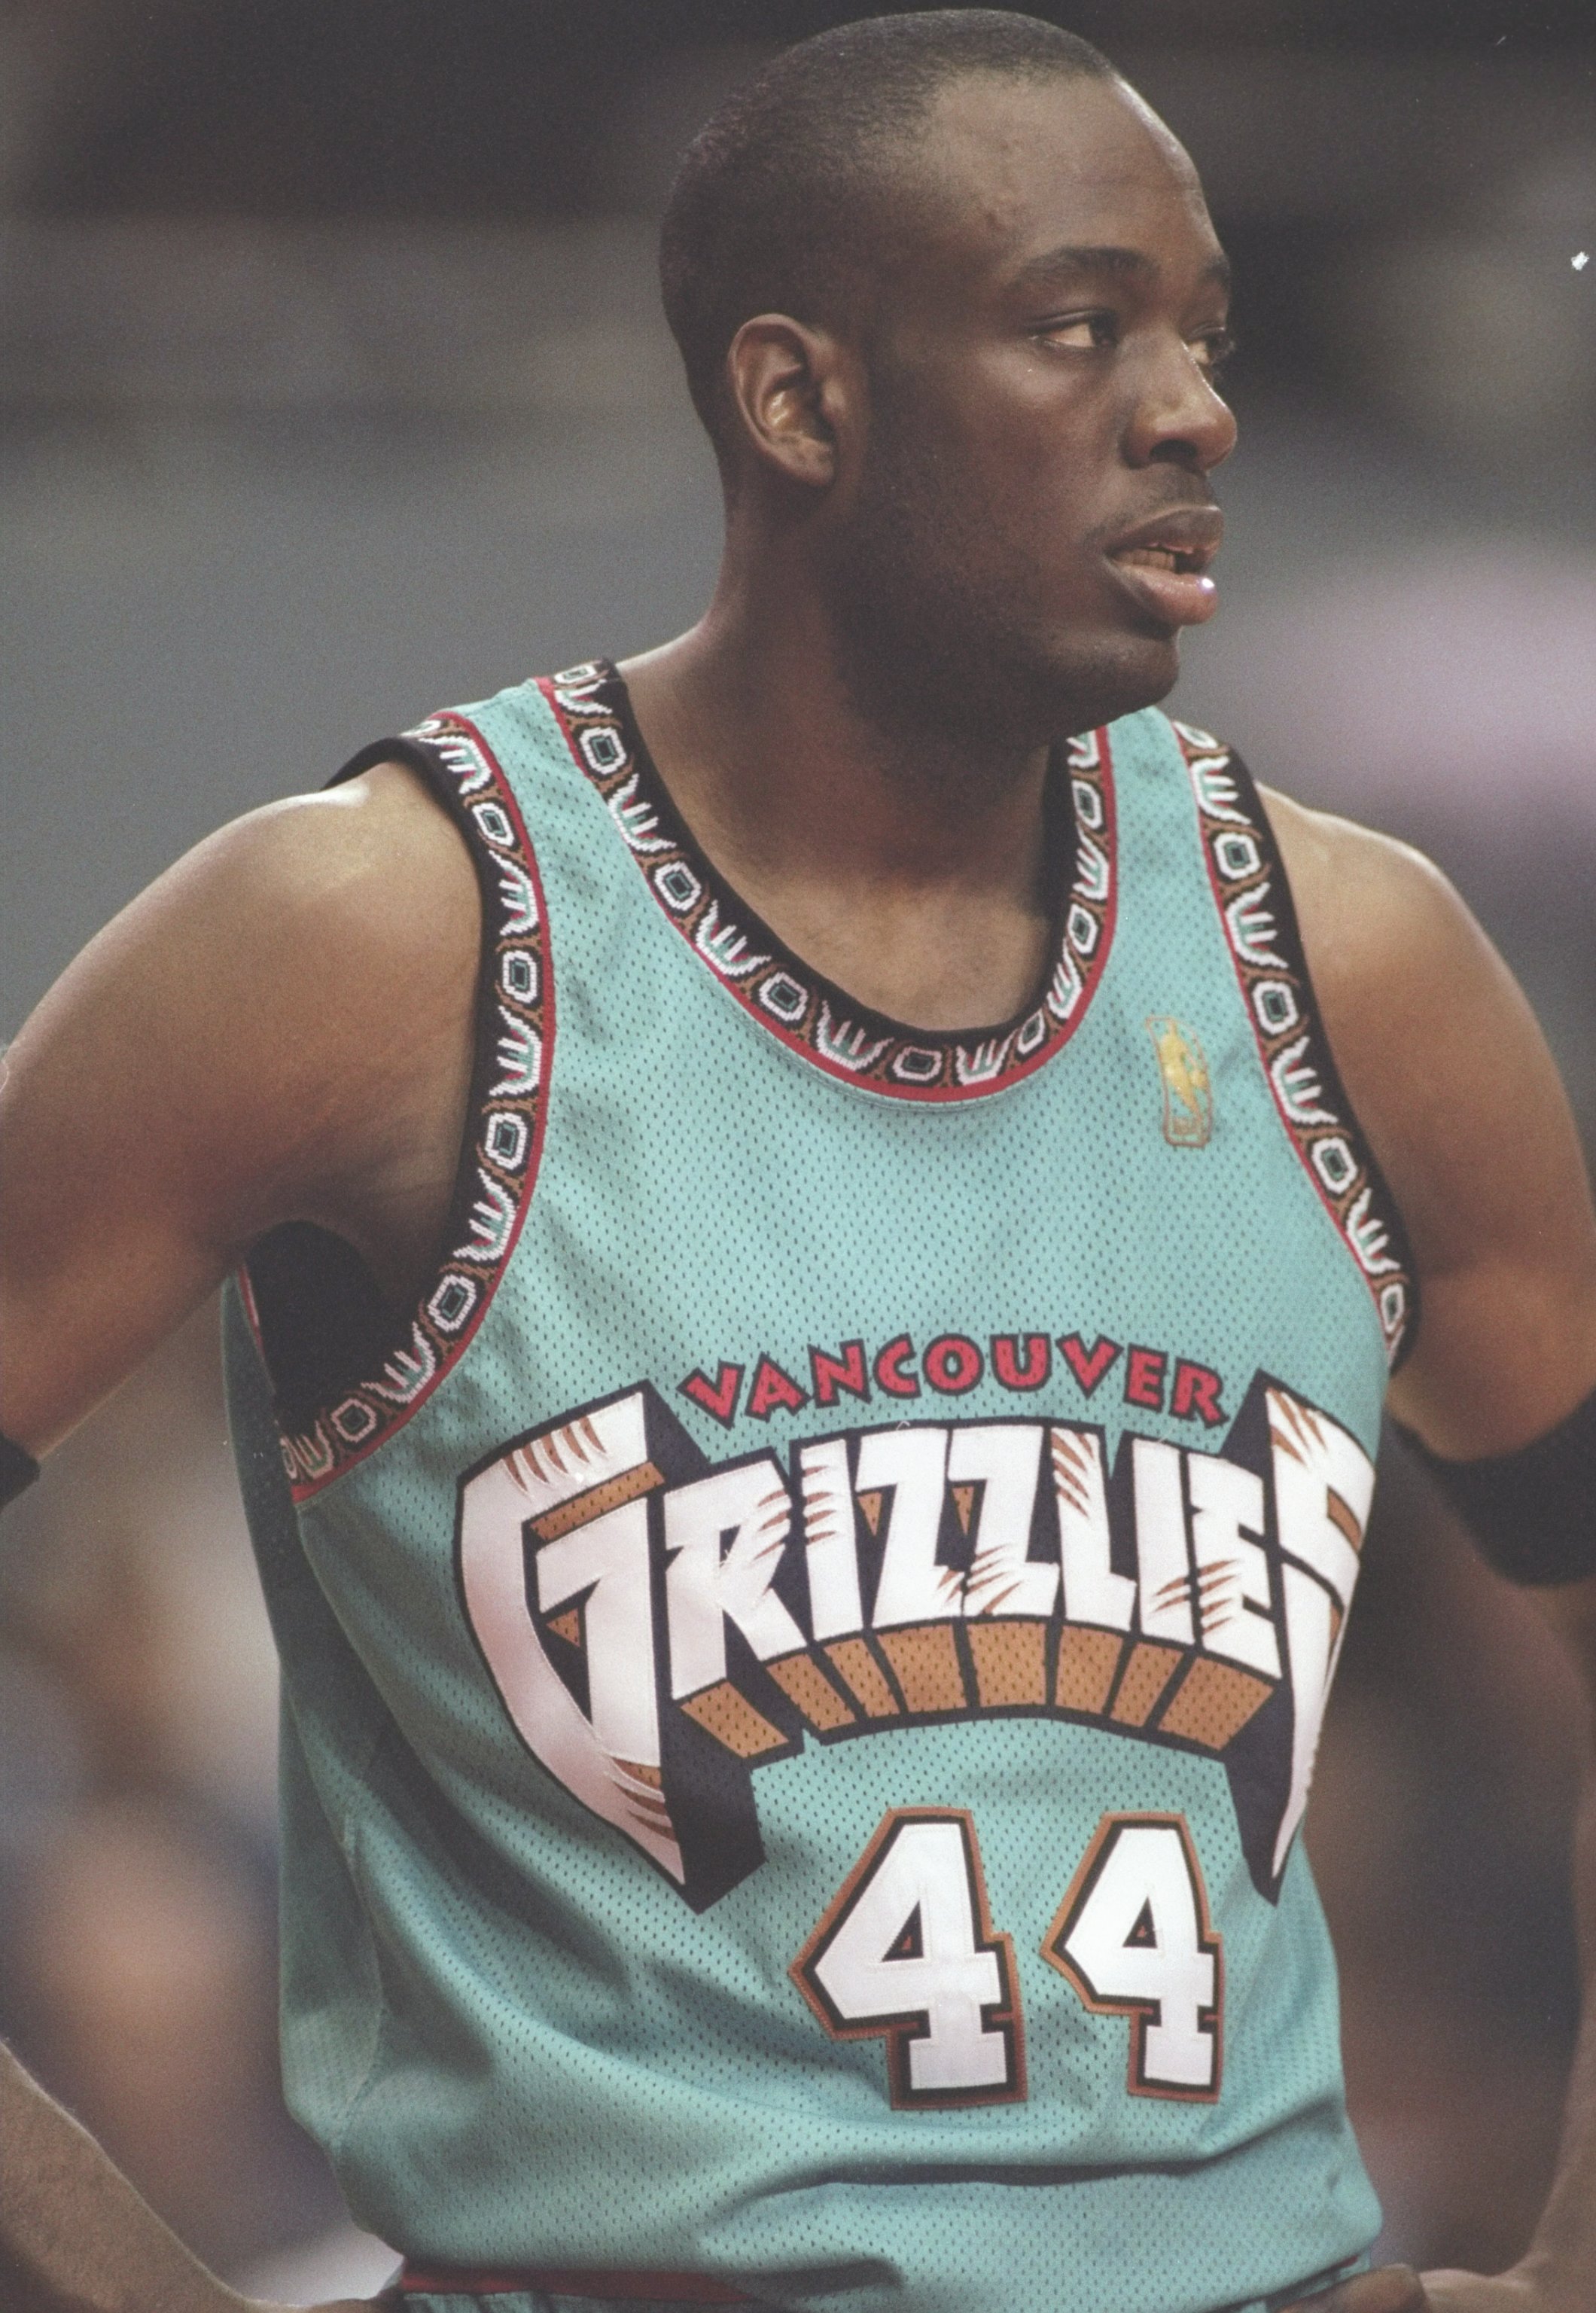 10 NBA player/jersey combos that just don't look right - Page 7